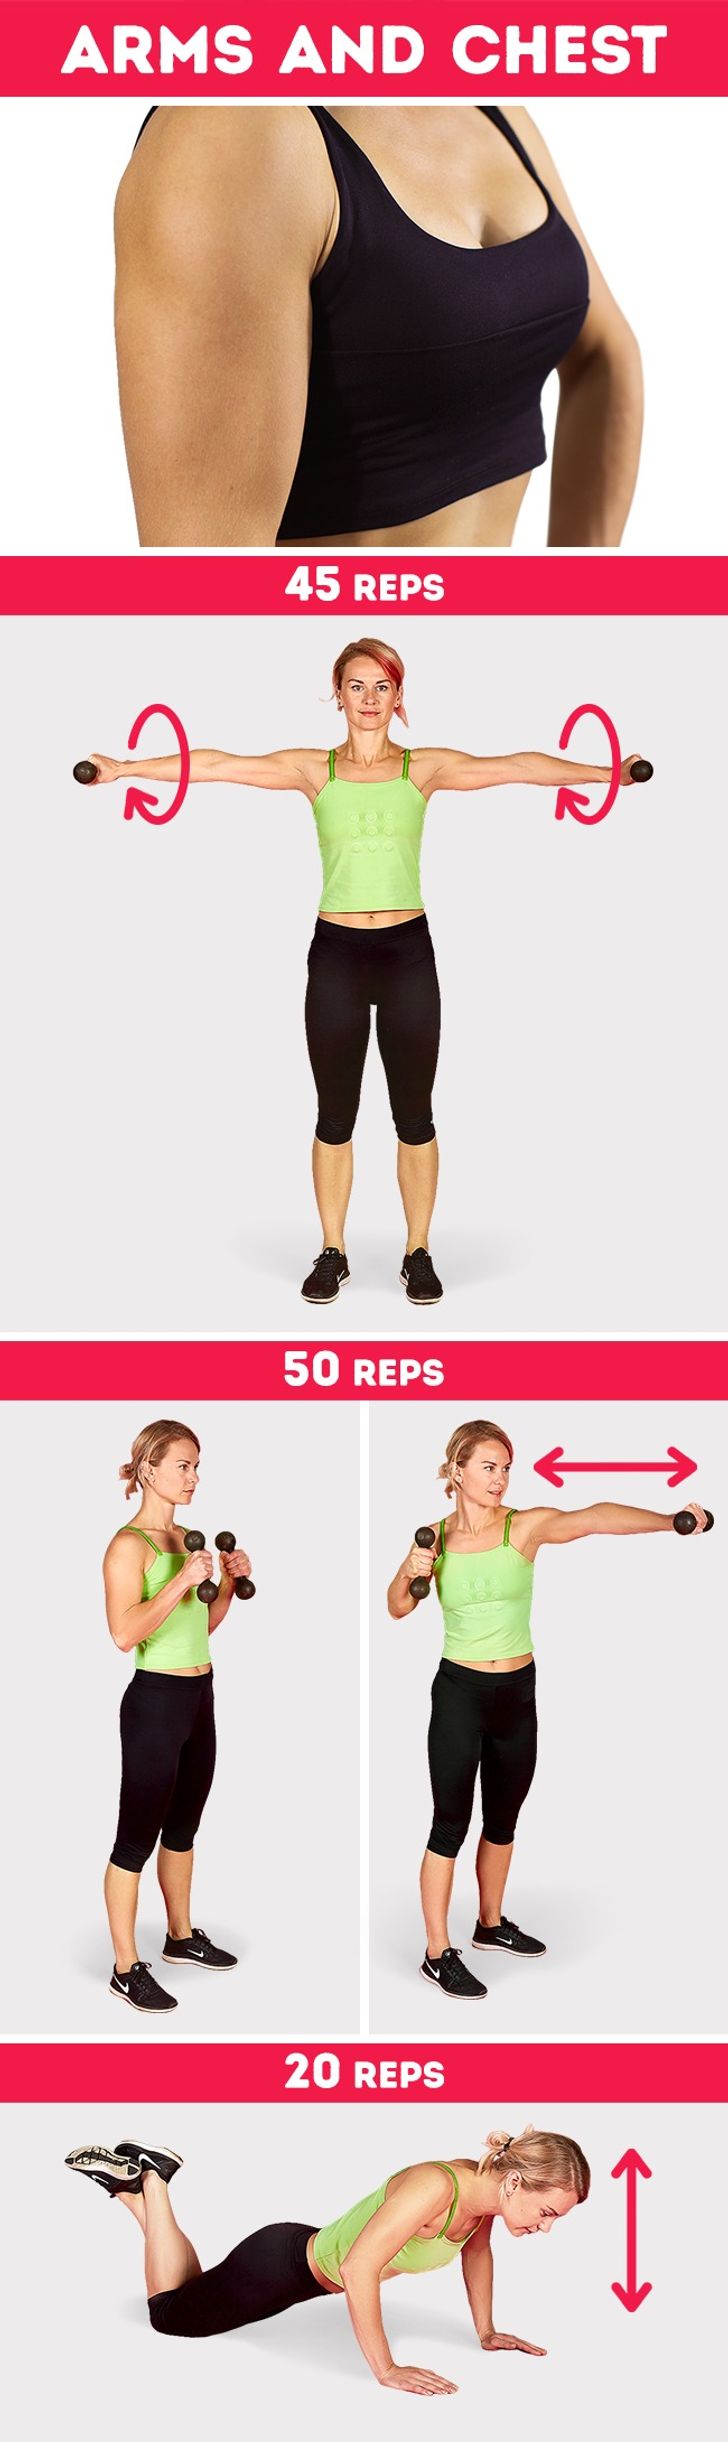 Simple Workout Routine To Lose Weight And Tone Up for Weight Loss